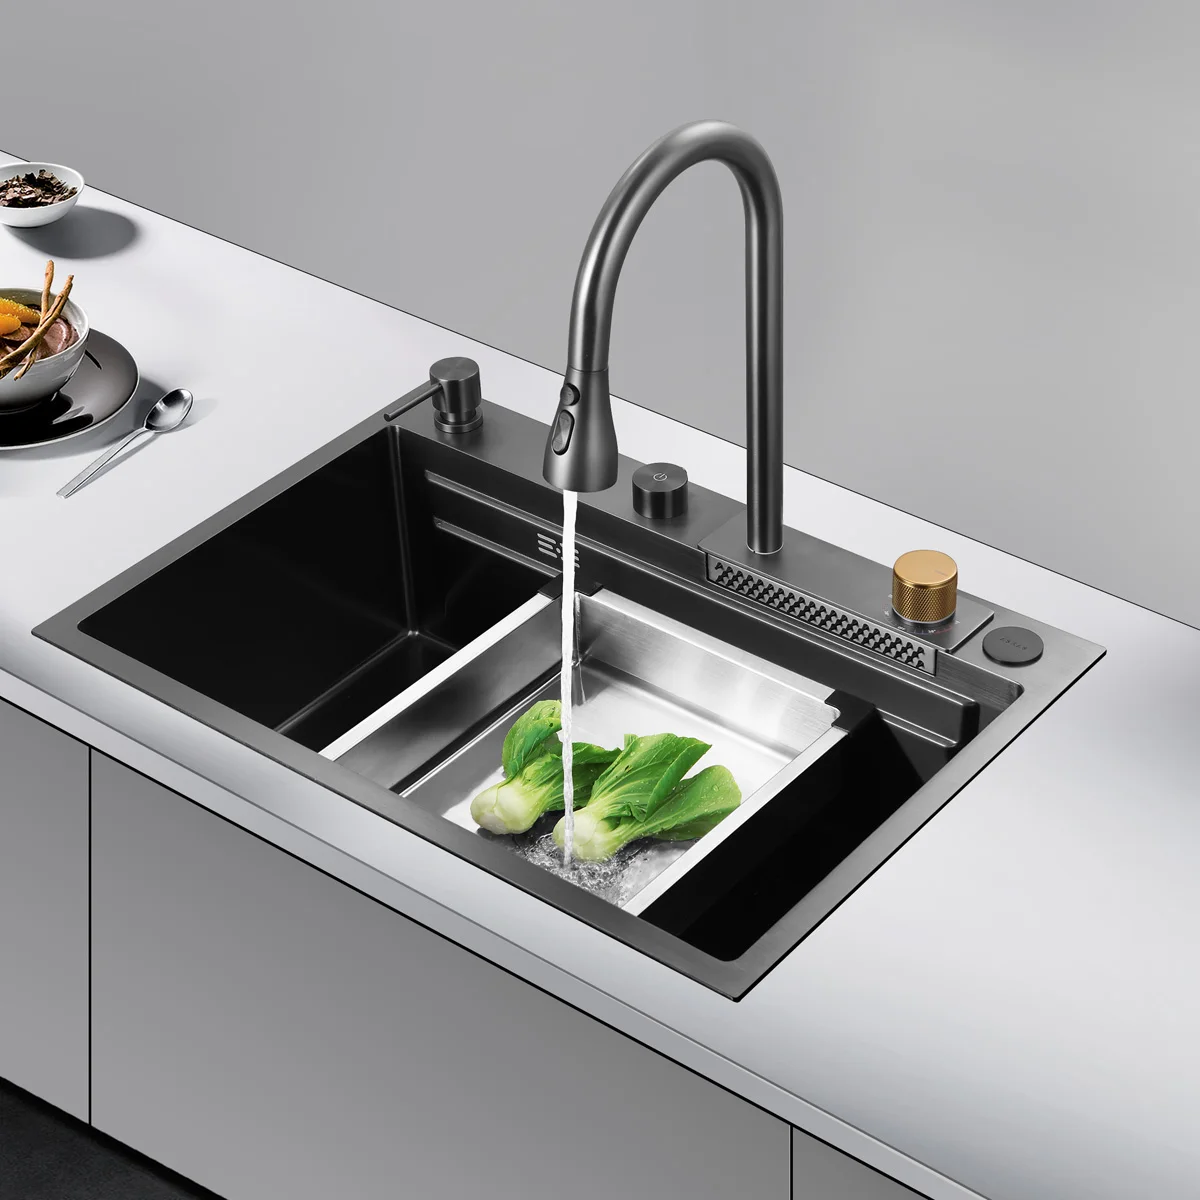 Asras New Model 6847FY ss304 Stainless Steel Single Basin Nano Black Rainfall Handmade Kitchen Sink with Rainfall Faucet